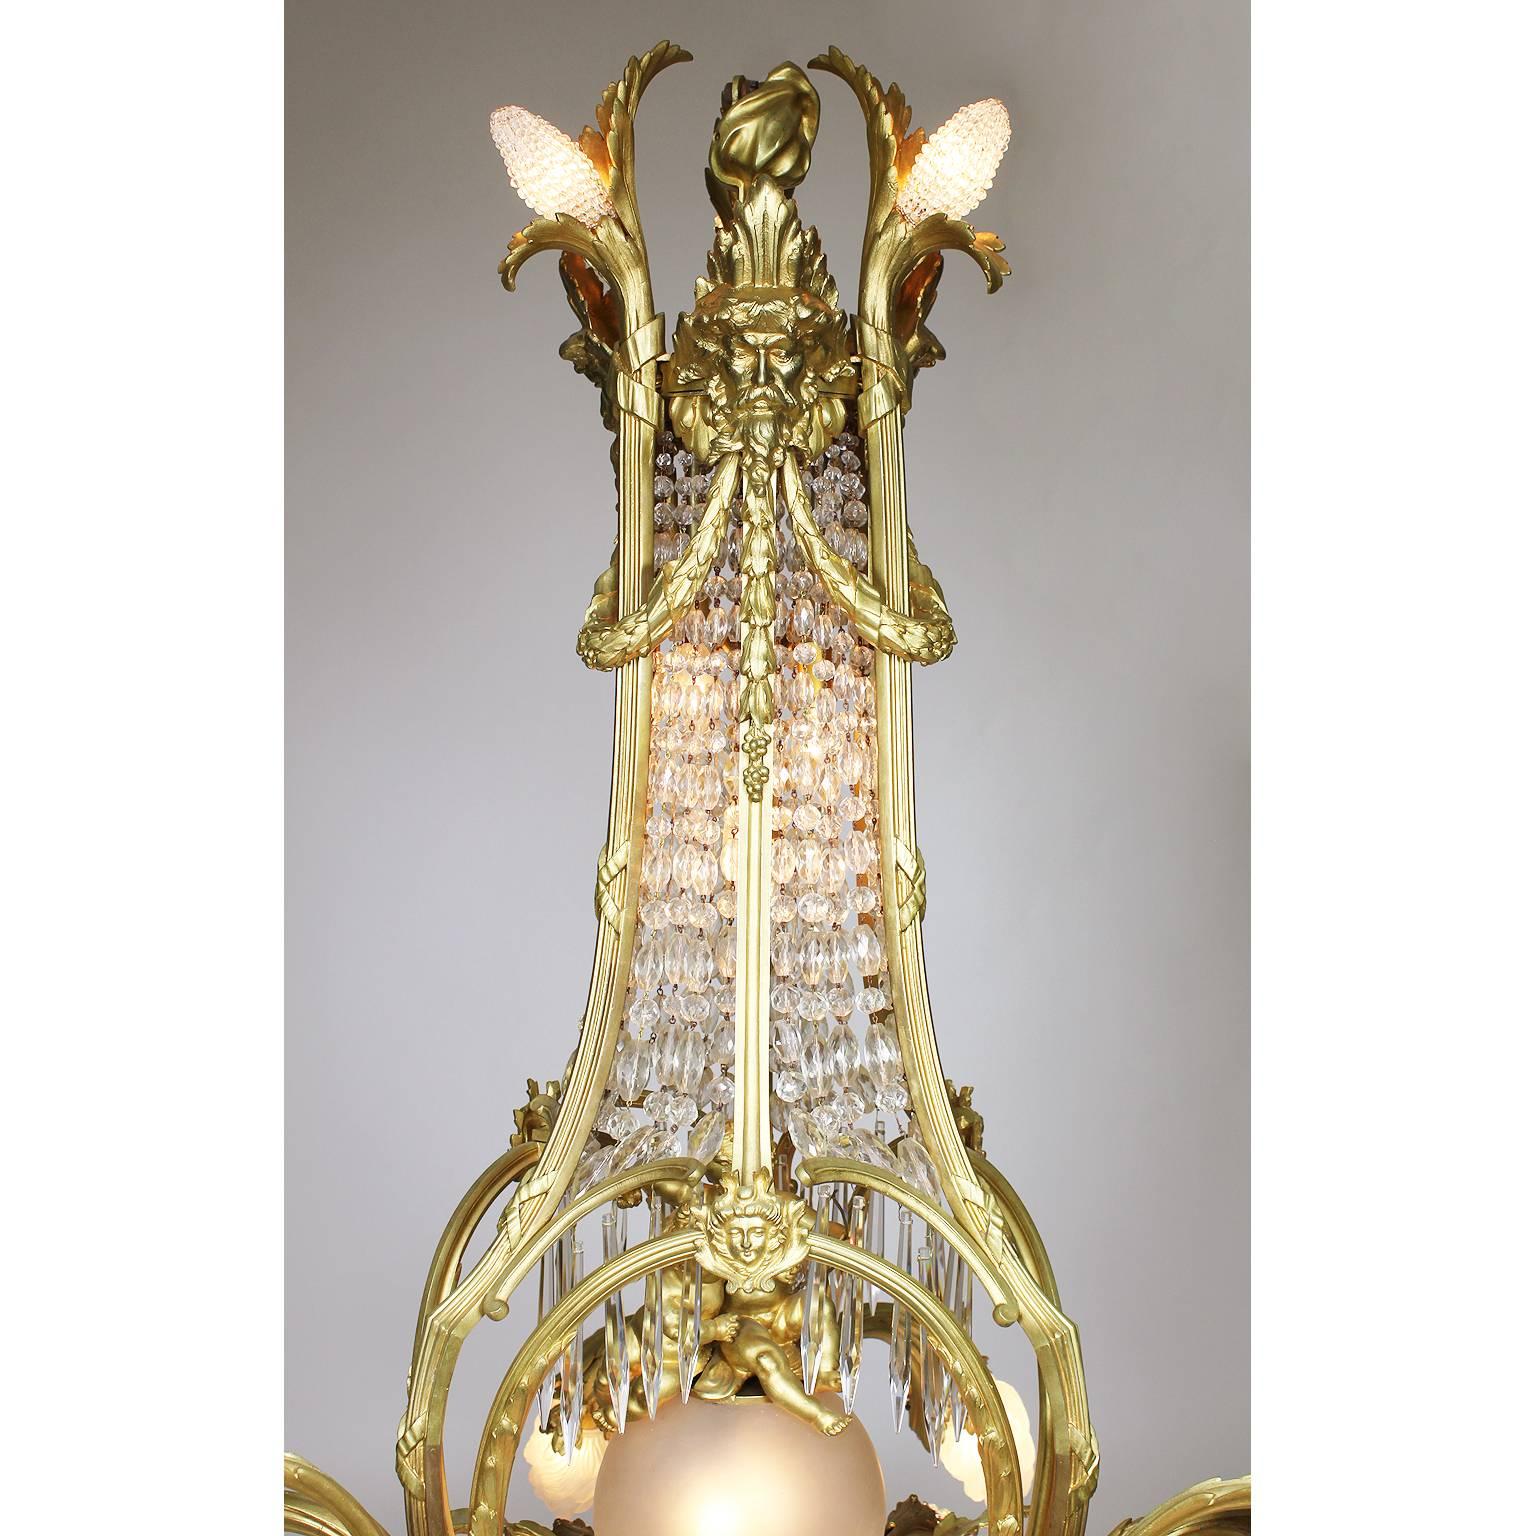 Early 20th Century French Belle Époque Gilt-Bronze and Cut-Glass Figural Cherub & Putto Chandelier For Sale